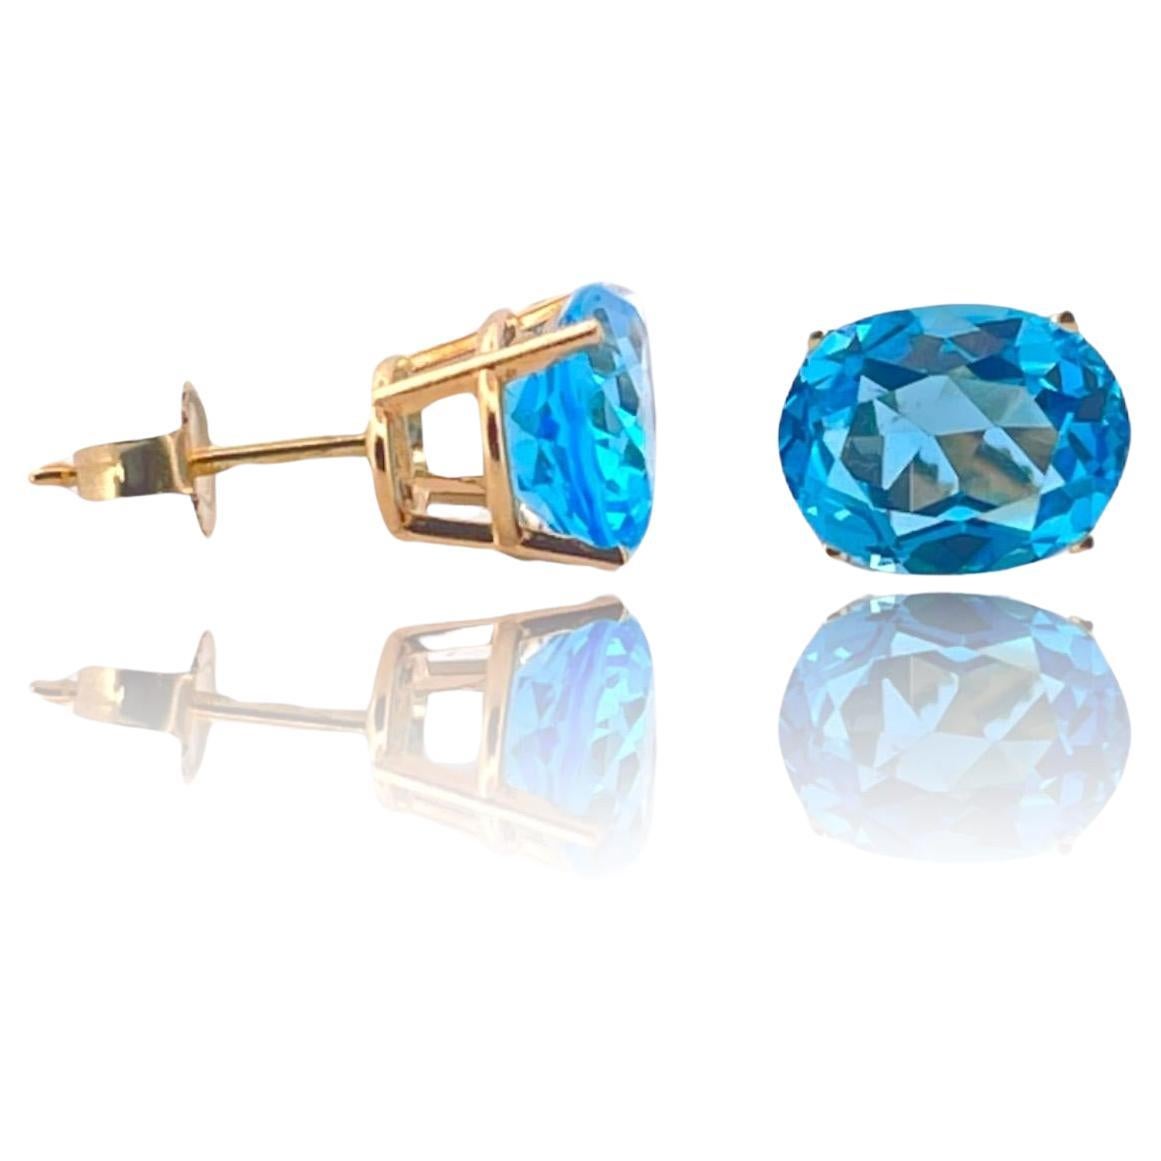 Enchanting Azure Bliss Oval Blue Topaz Studs in 14K Yellow Gold